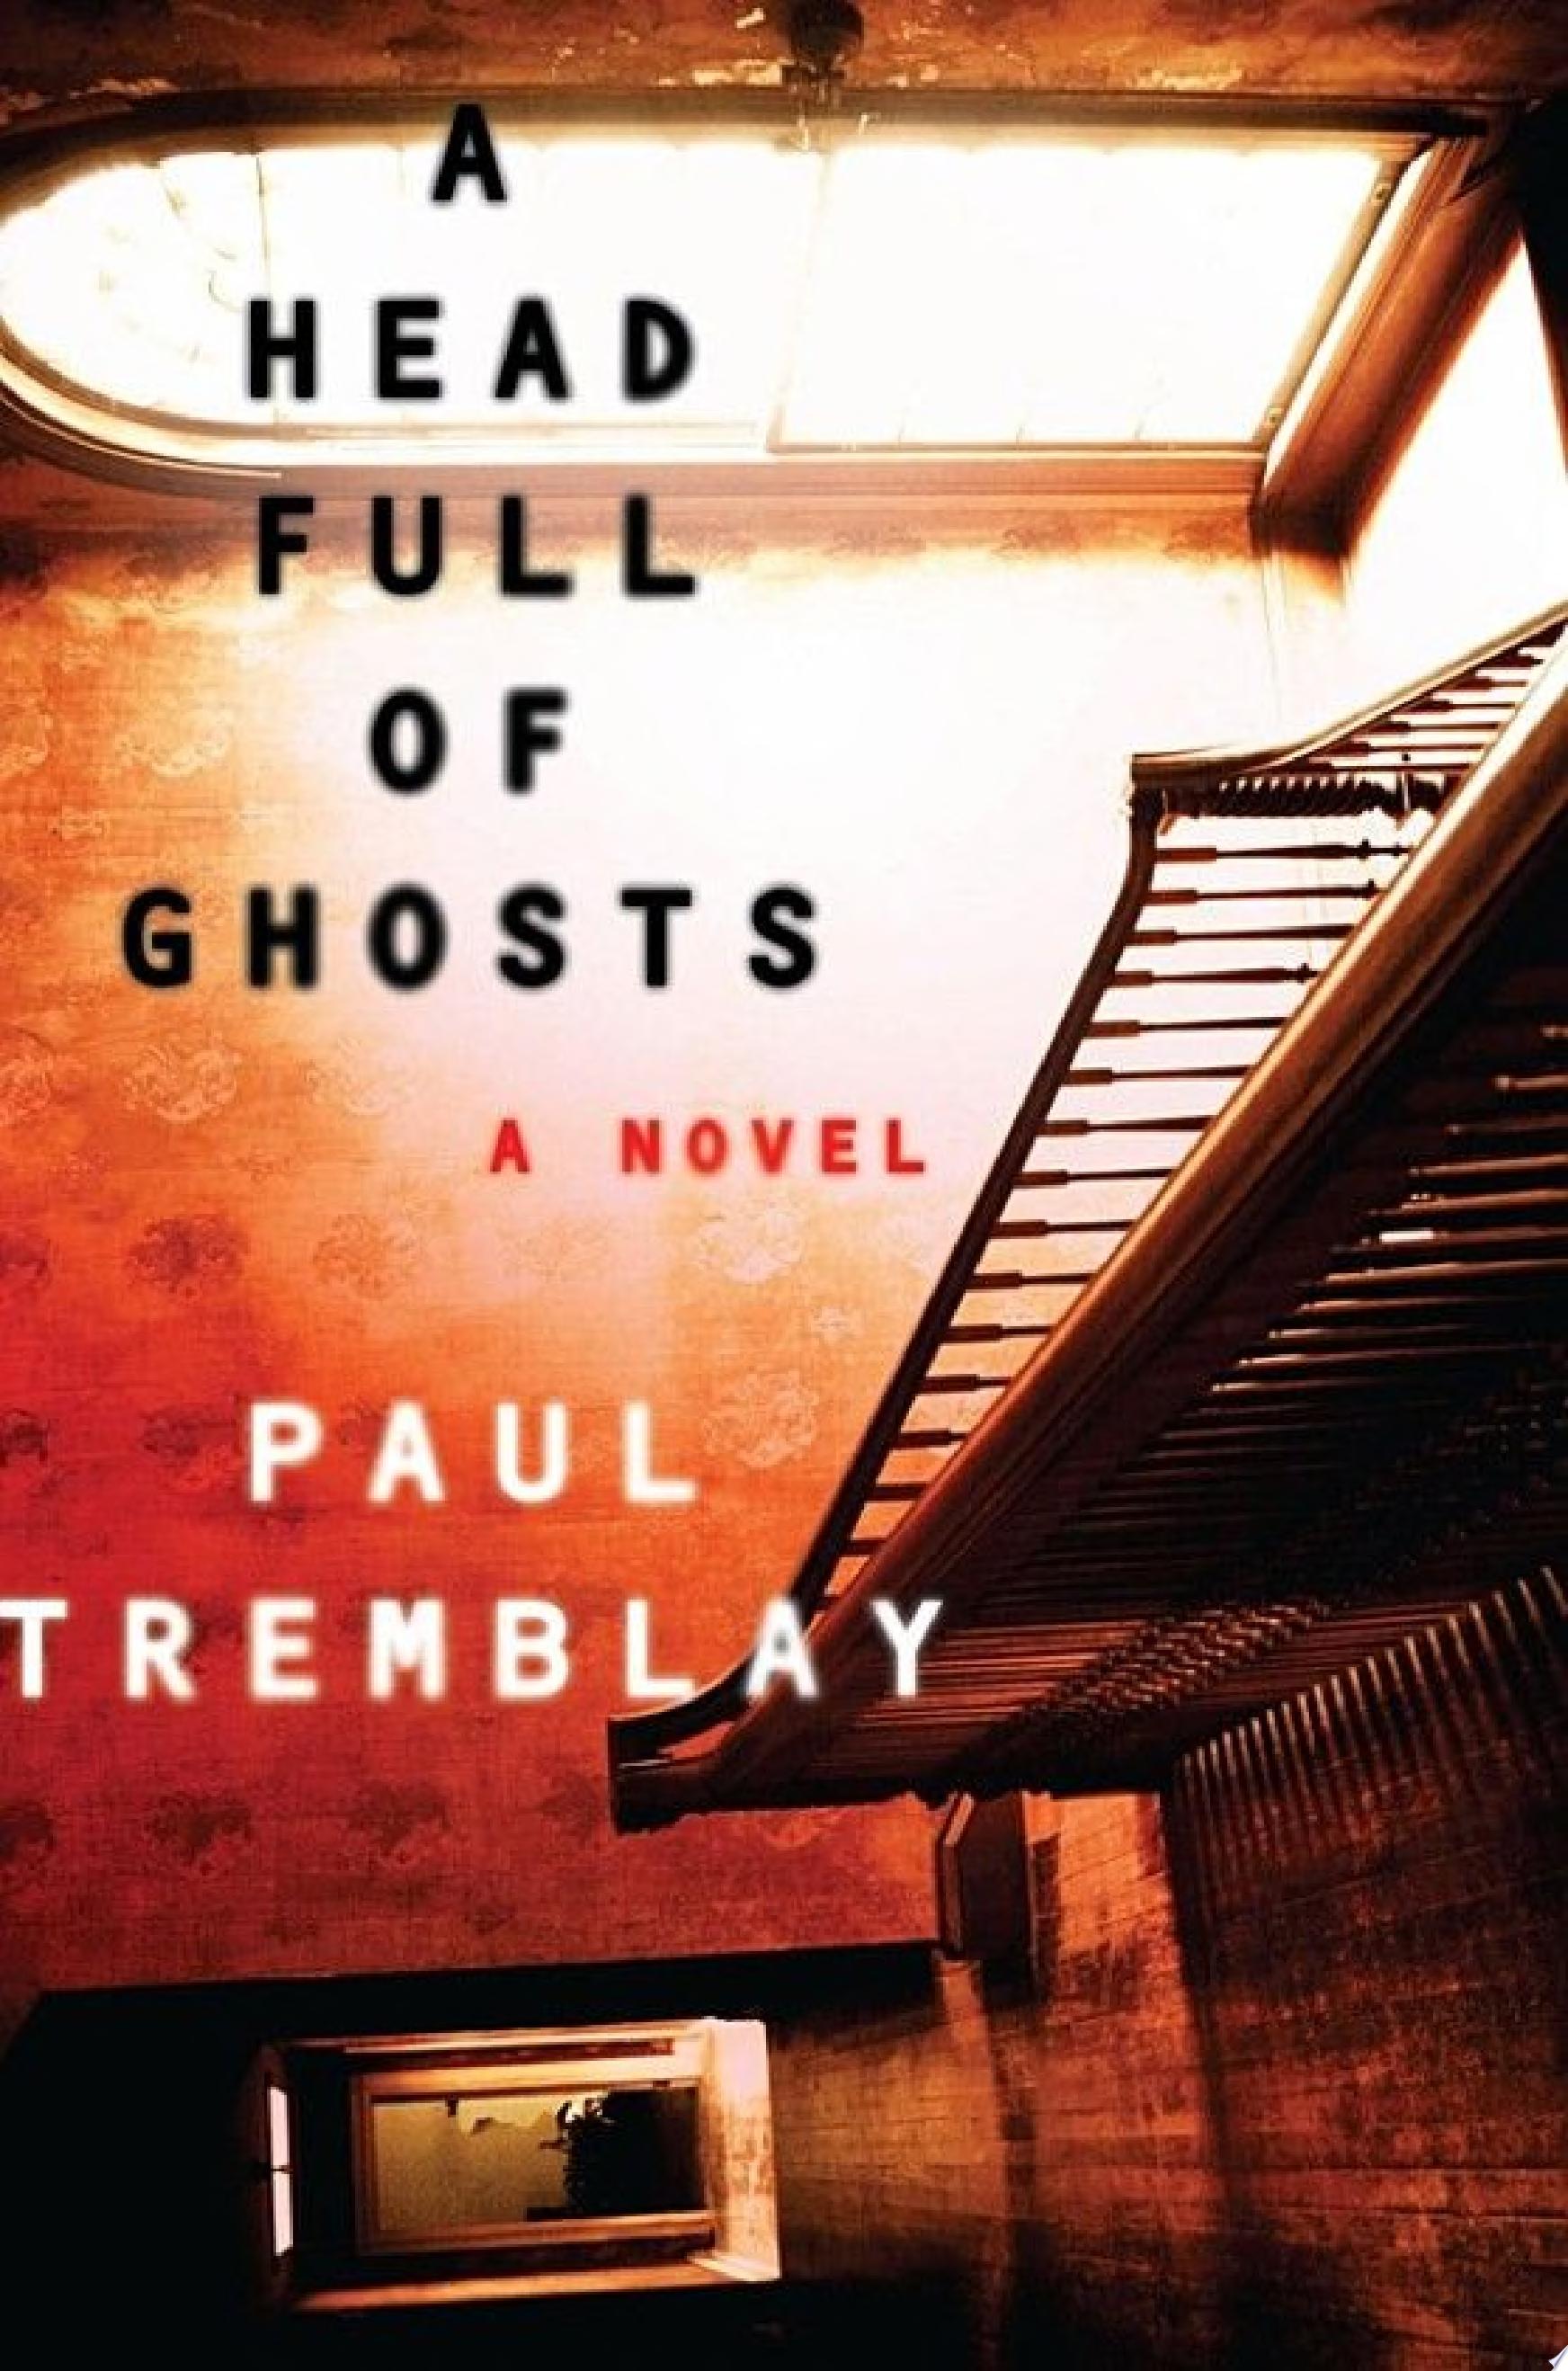 Image for "A Head Full of Ghosts"